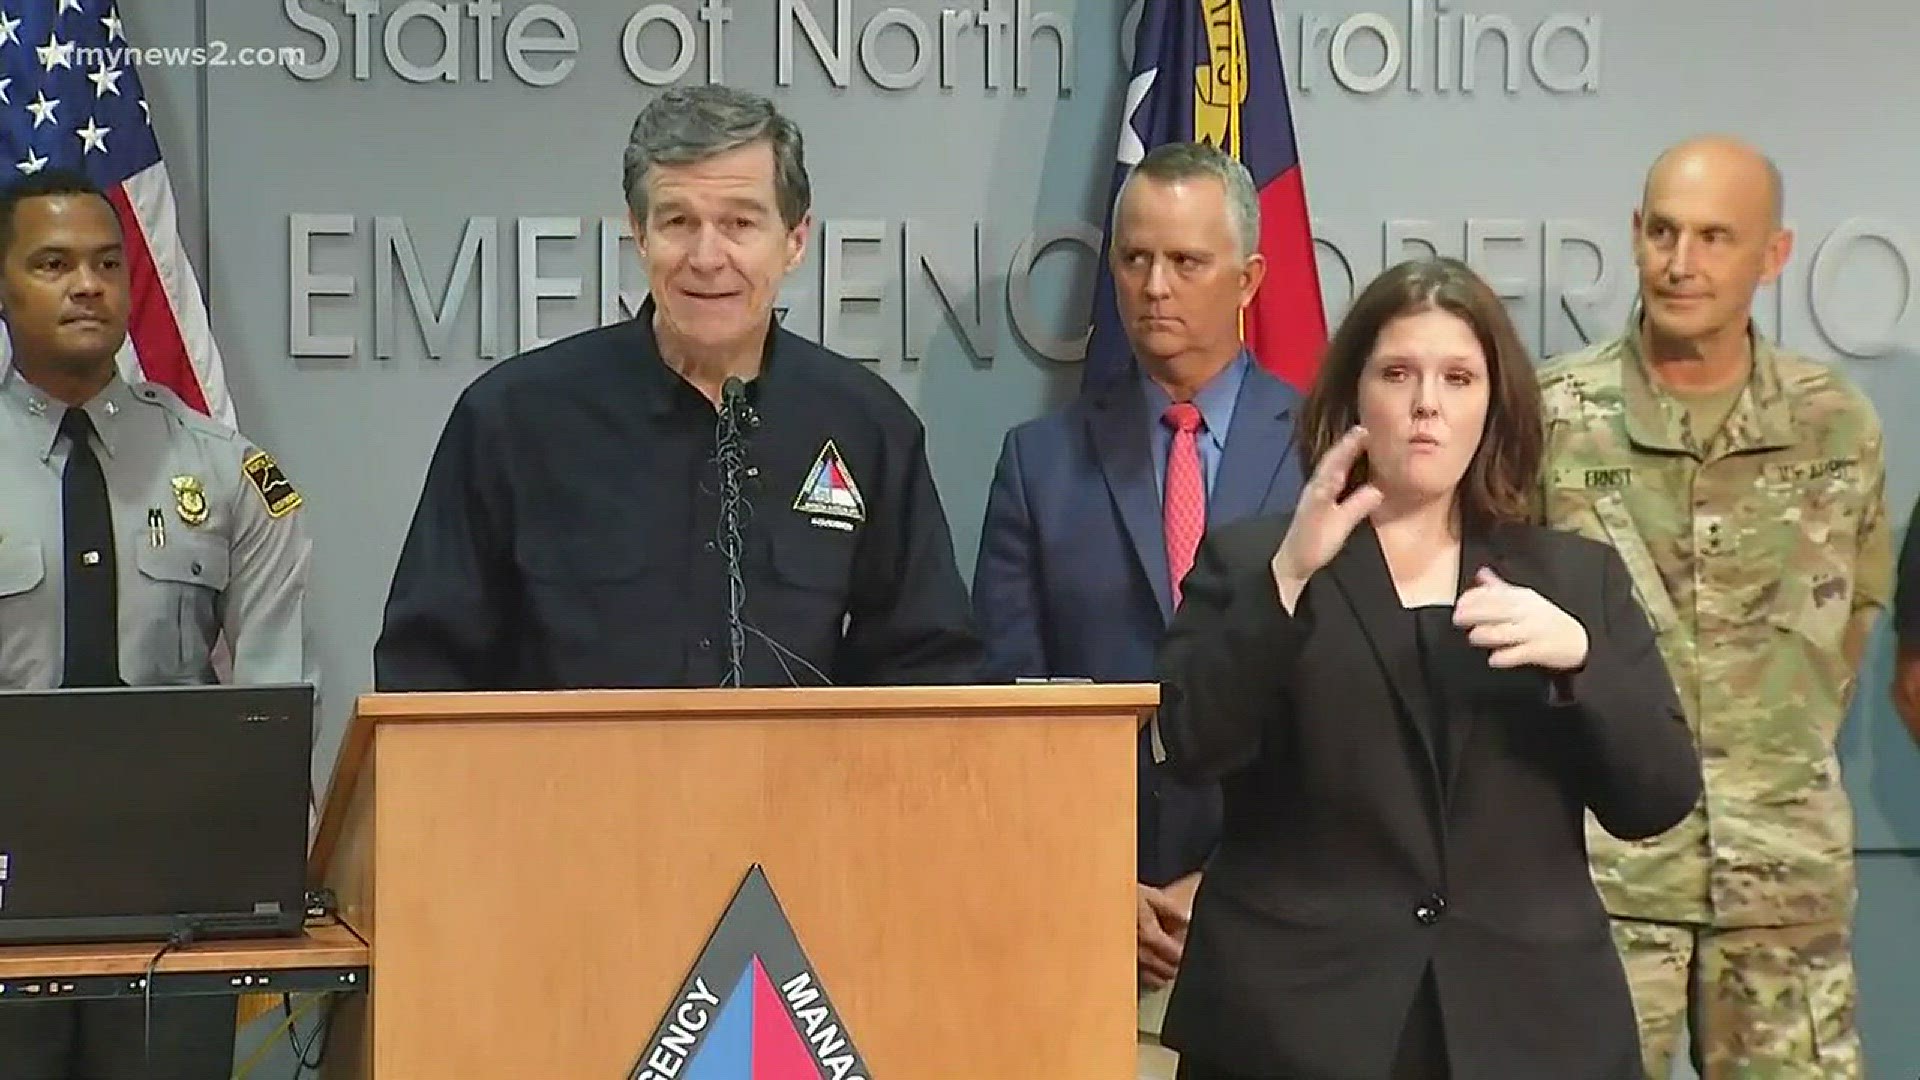 Governor Cooper held a press conference Thursday evening to warn of storm surges and flooding as impacts from Hurricane Florence. (5PM 9-13-18)